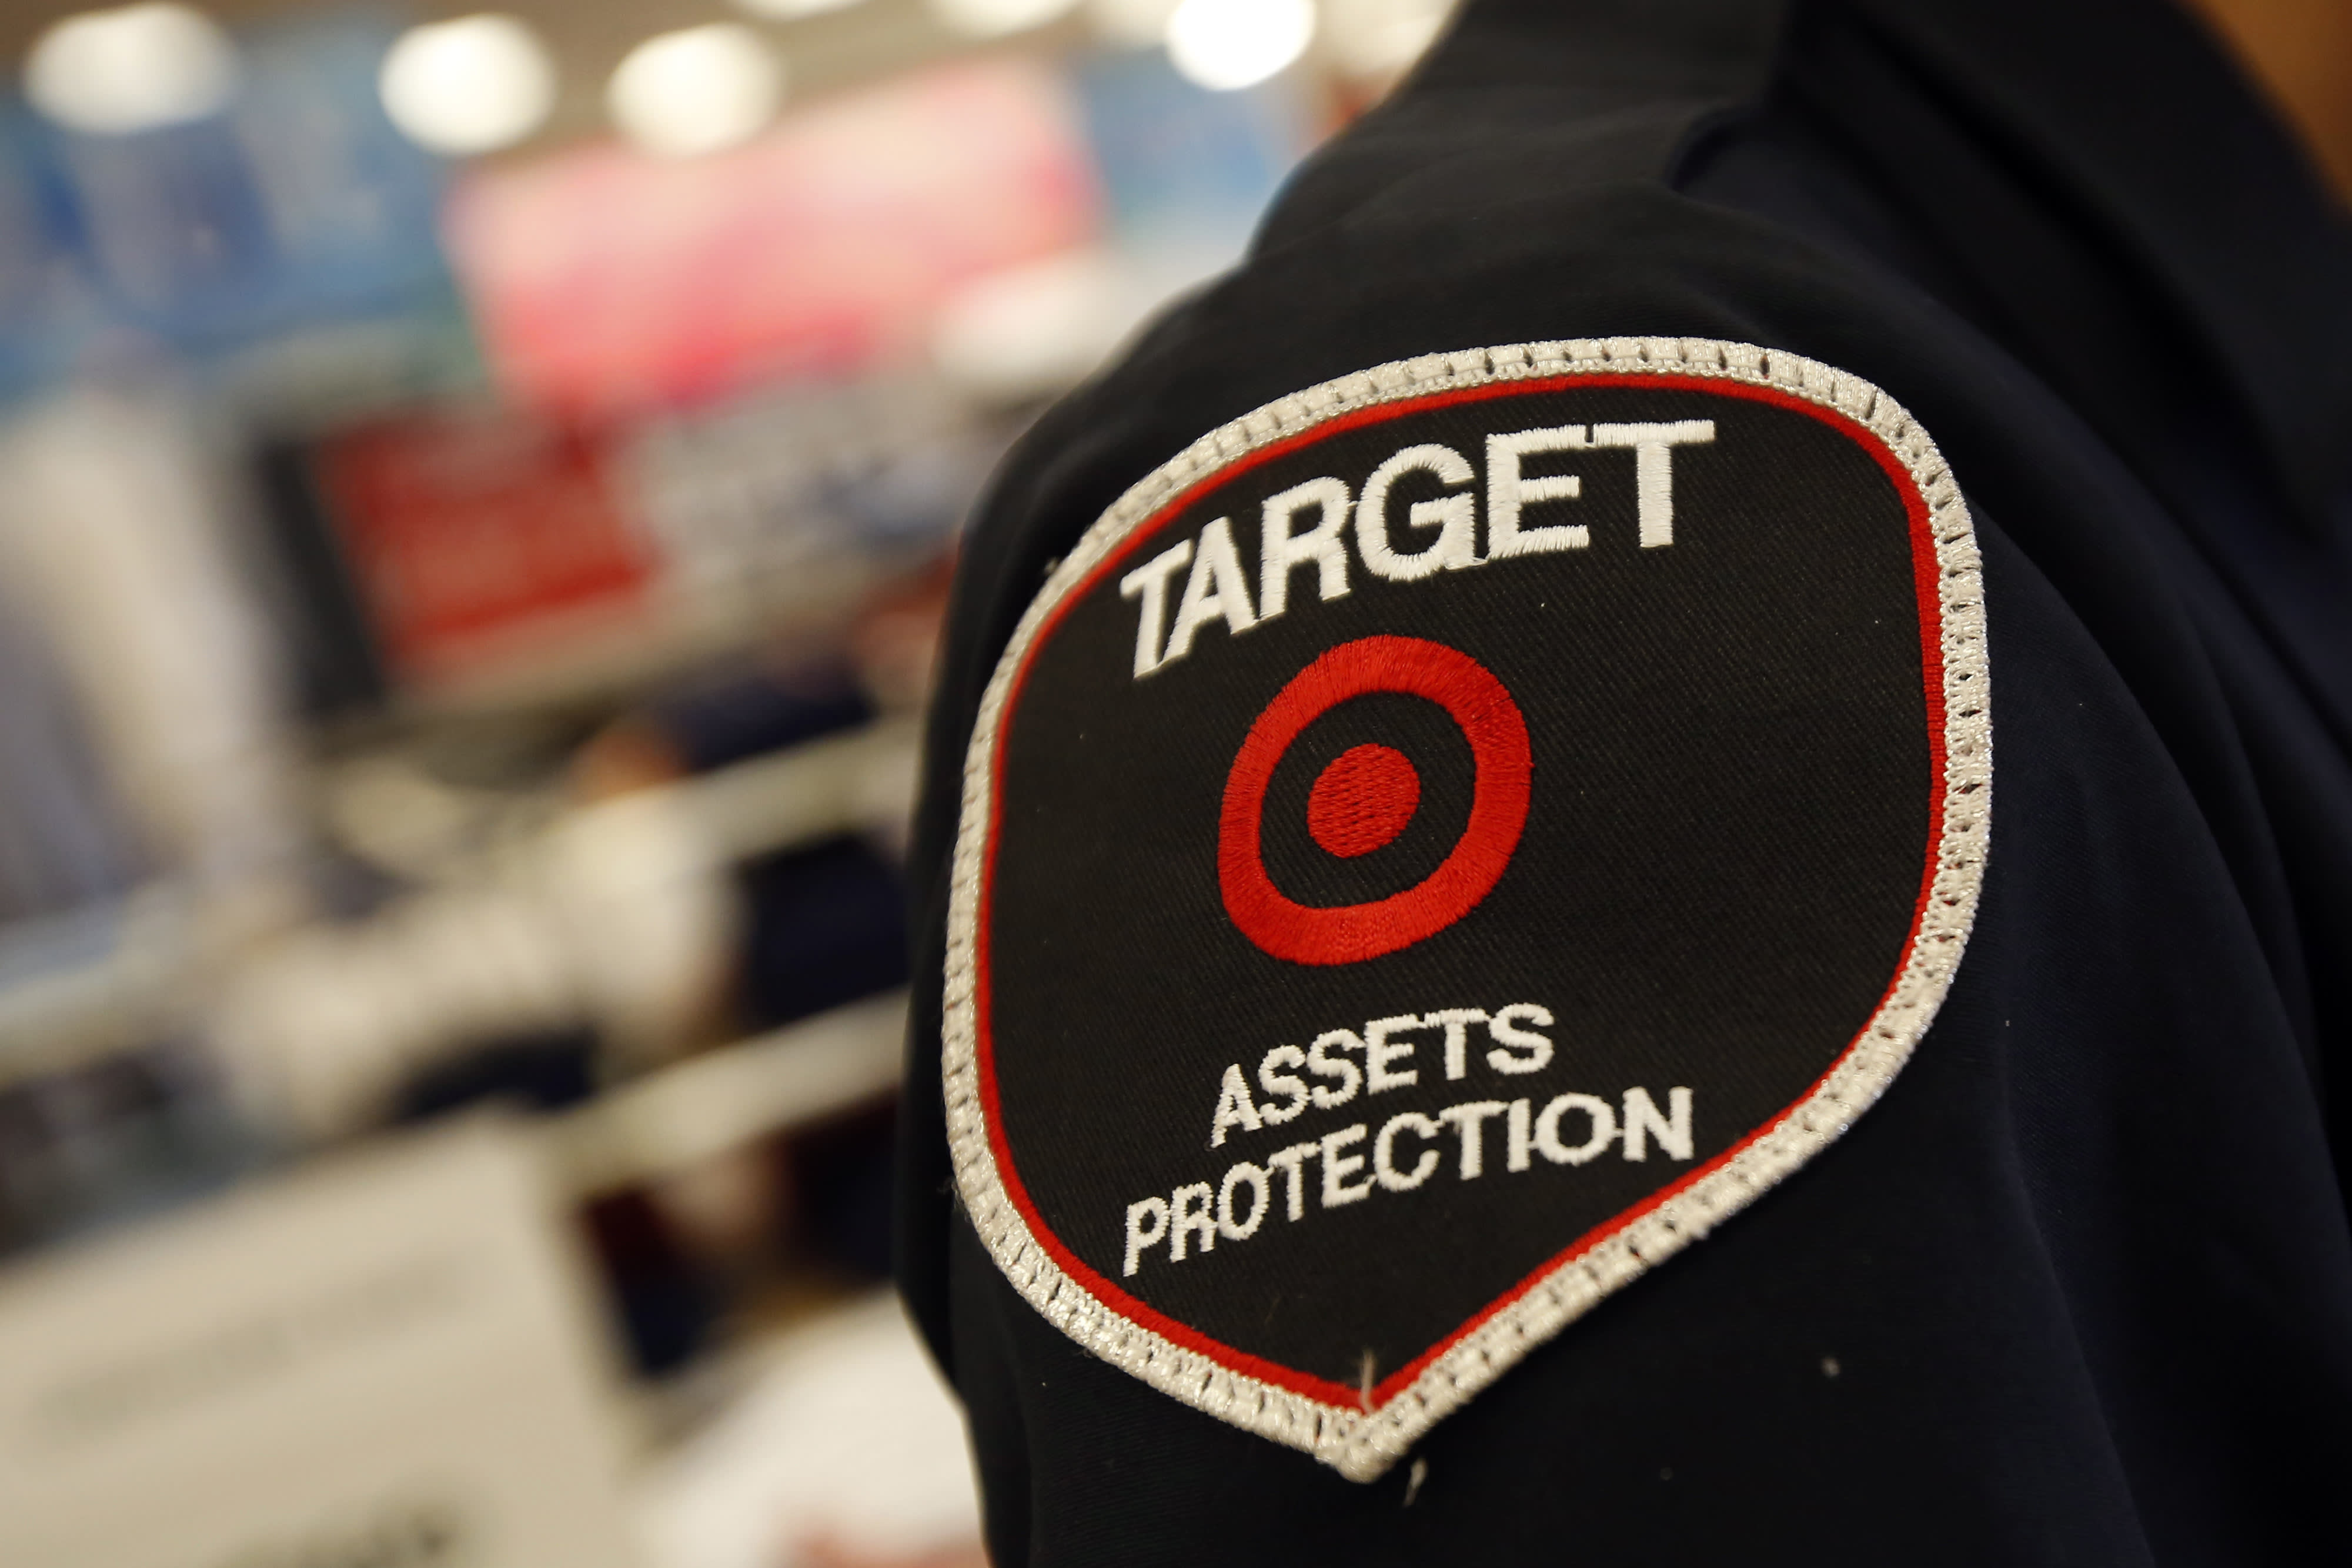 Target data breach spurring lawsuits, investigations